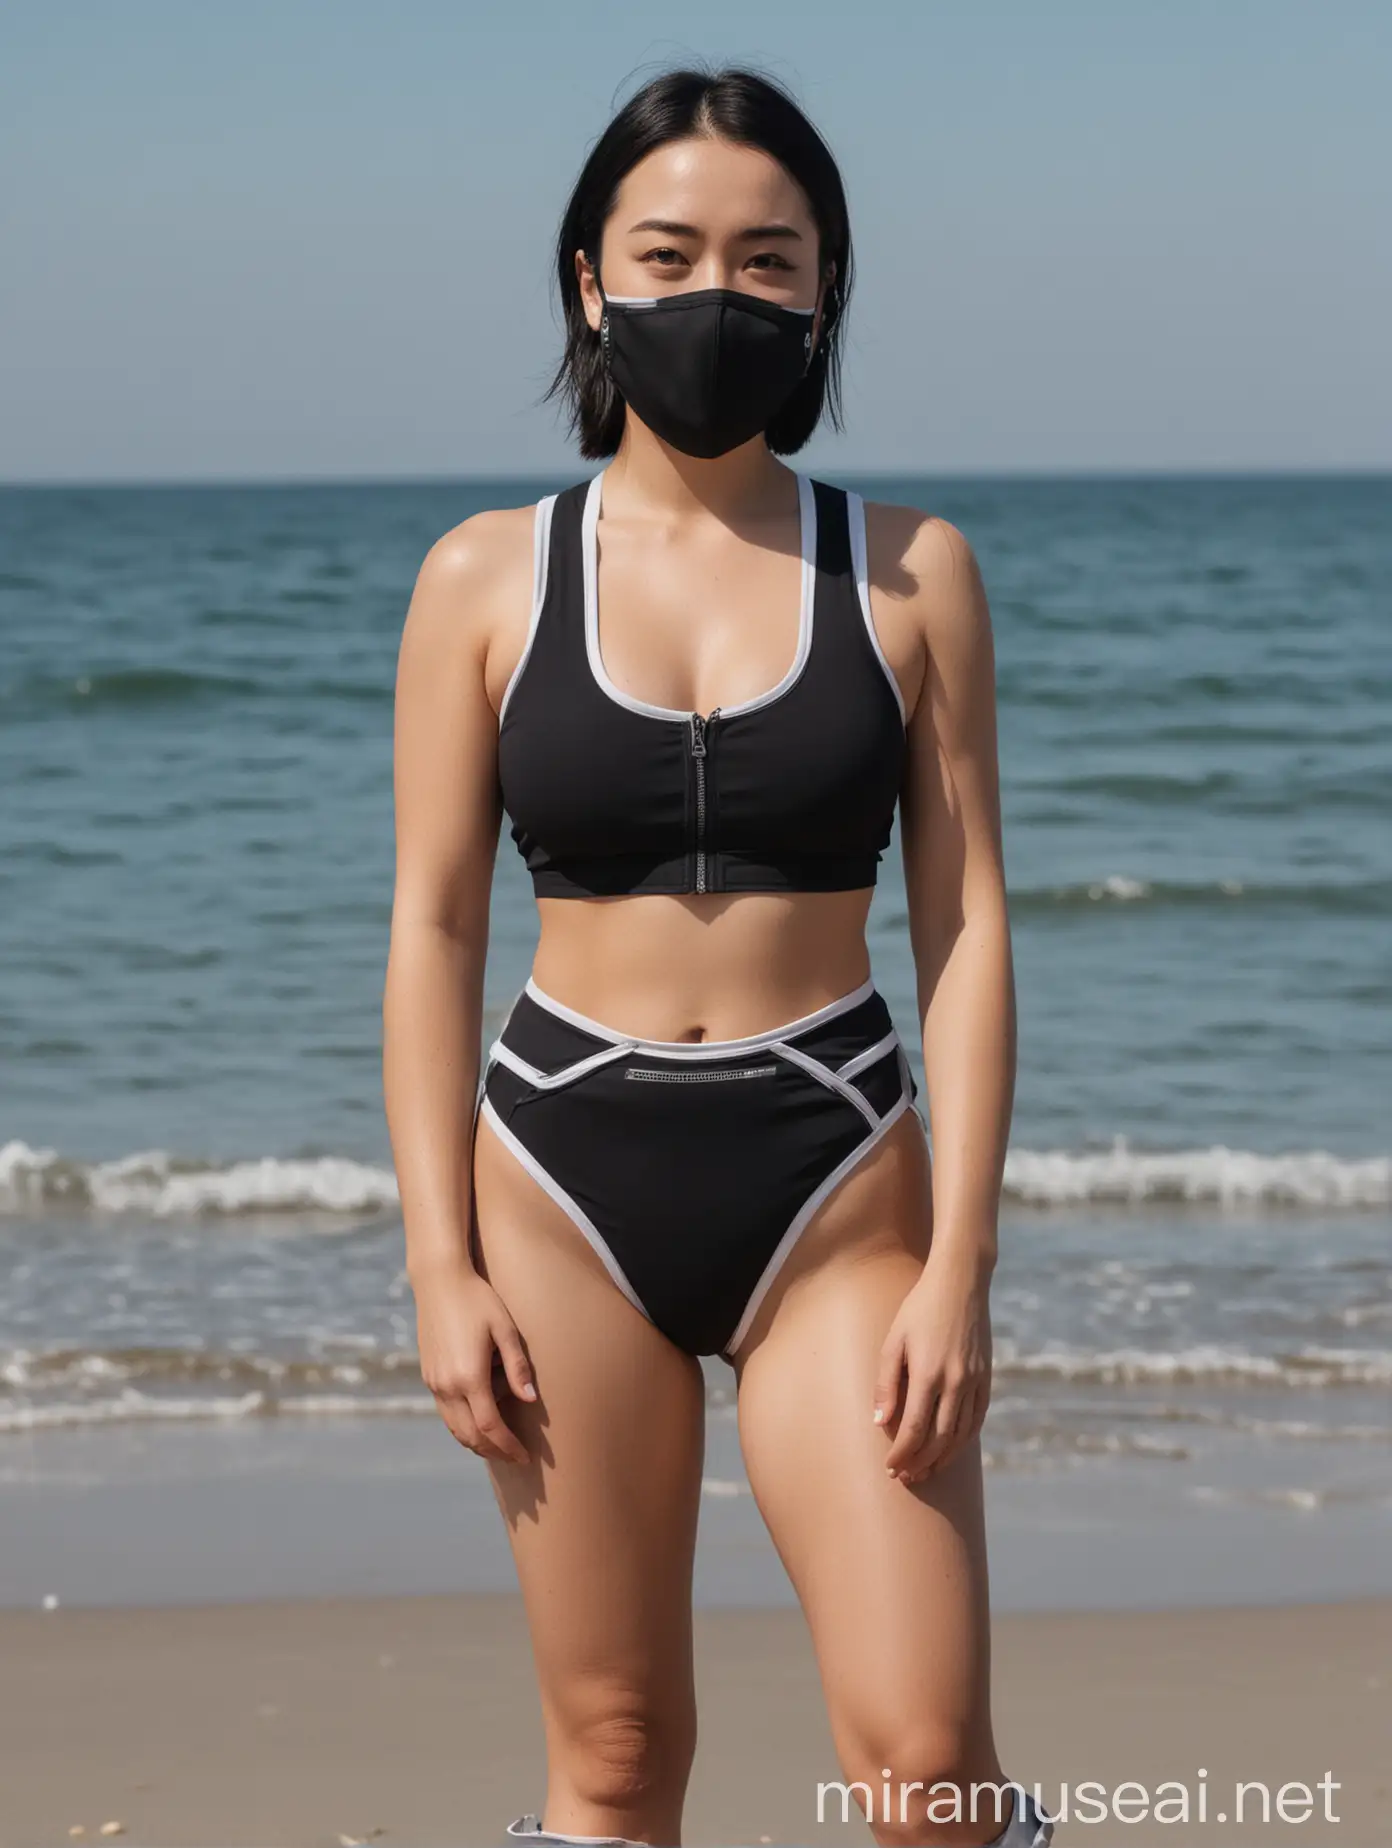 mitski, standing on a beach, in a respirator mask, wearing a black front zip tanktop with white trim, and black sexy sporty french cut bikini bottoms with white trim